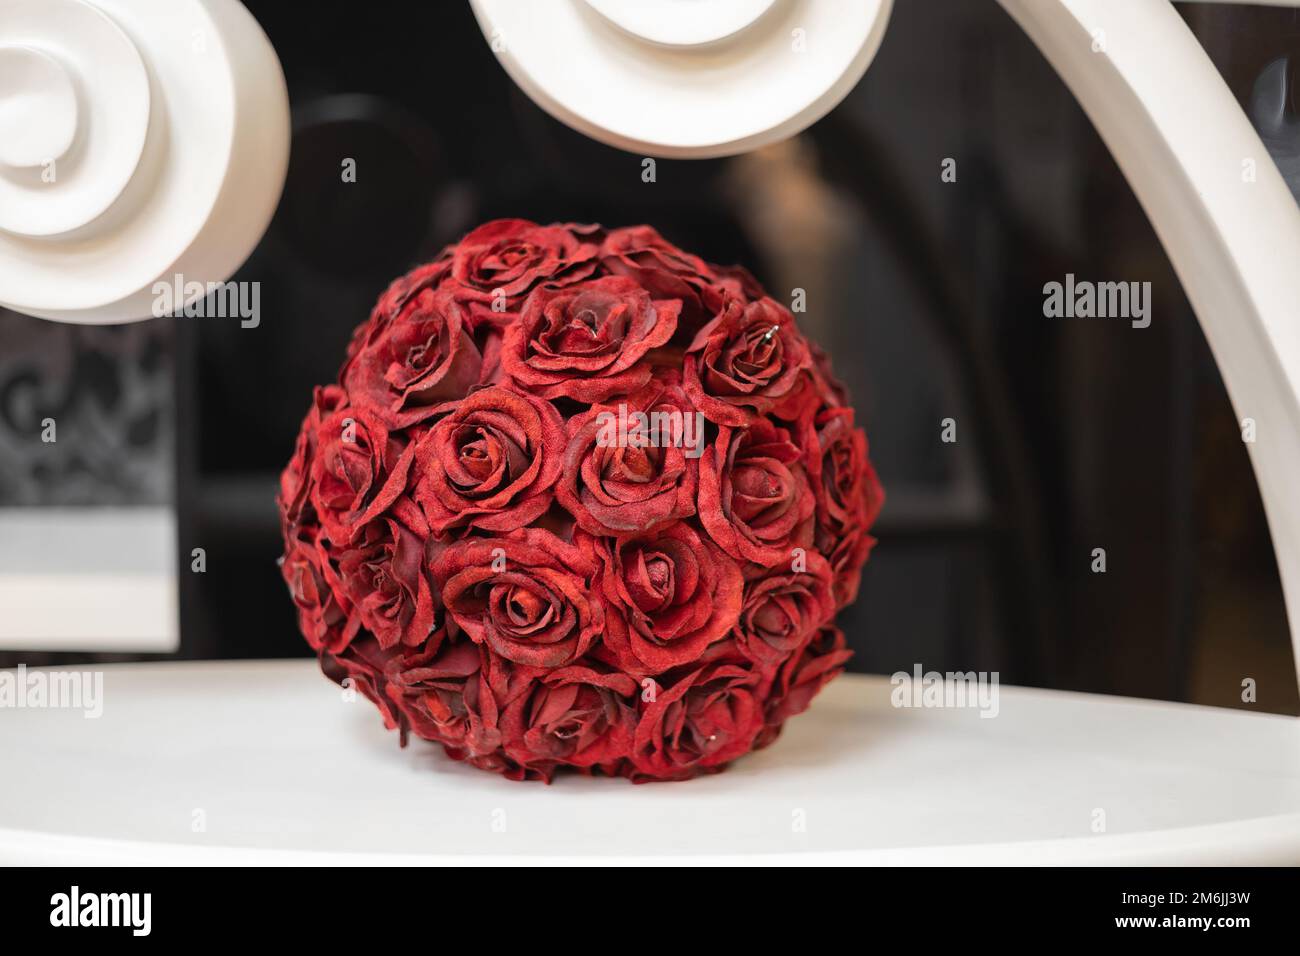 A decorative ball made from red rose sepals stands on a white surface indoors. Interior decoration. Stock Photo